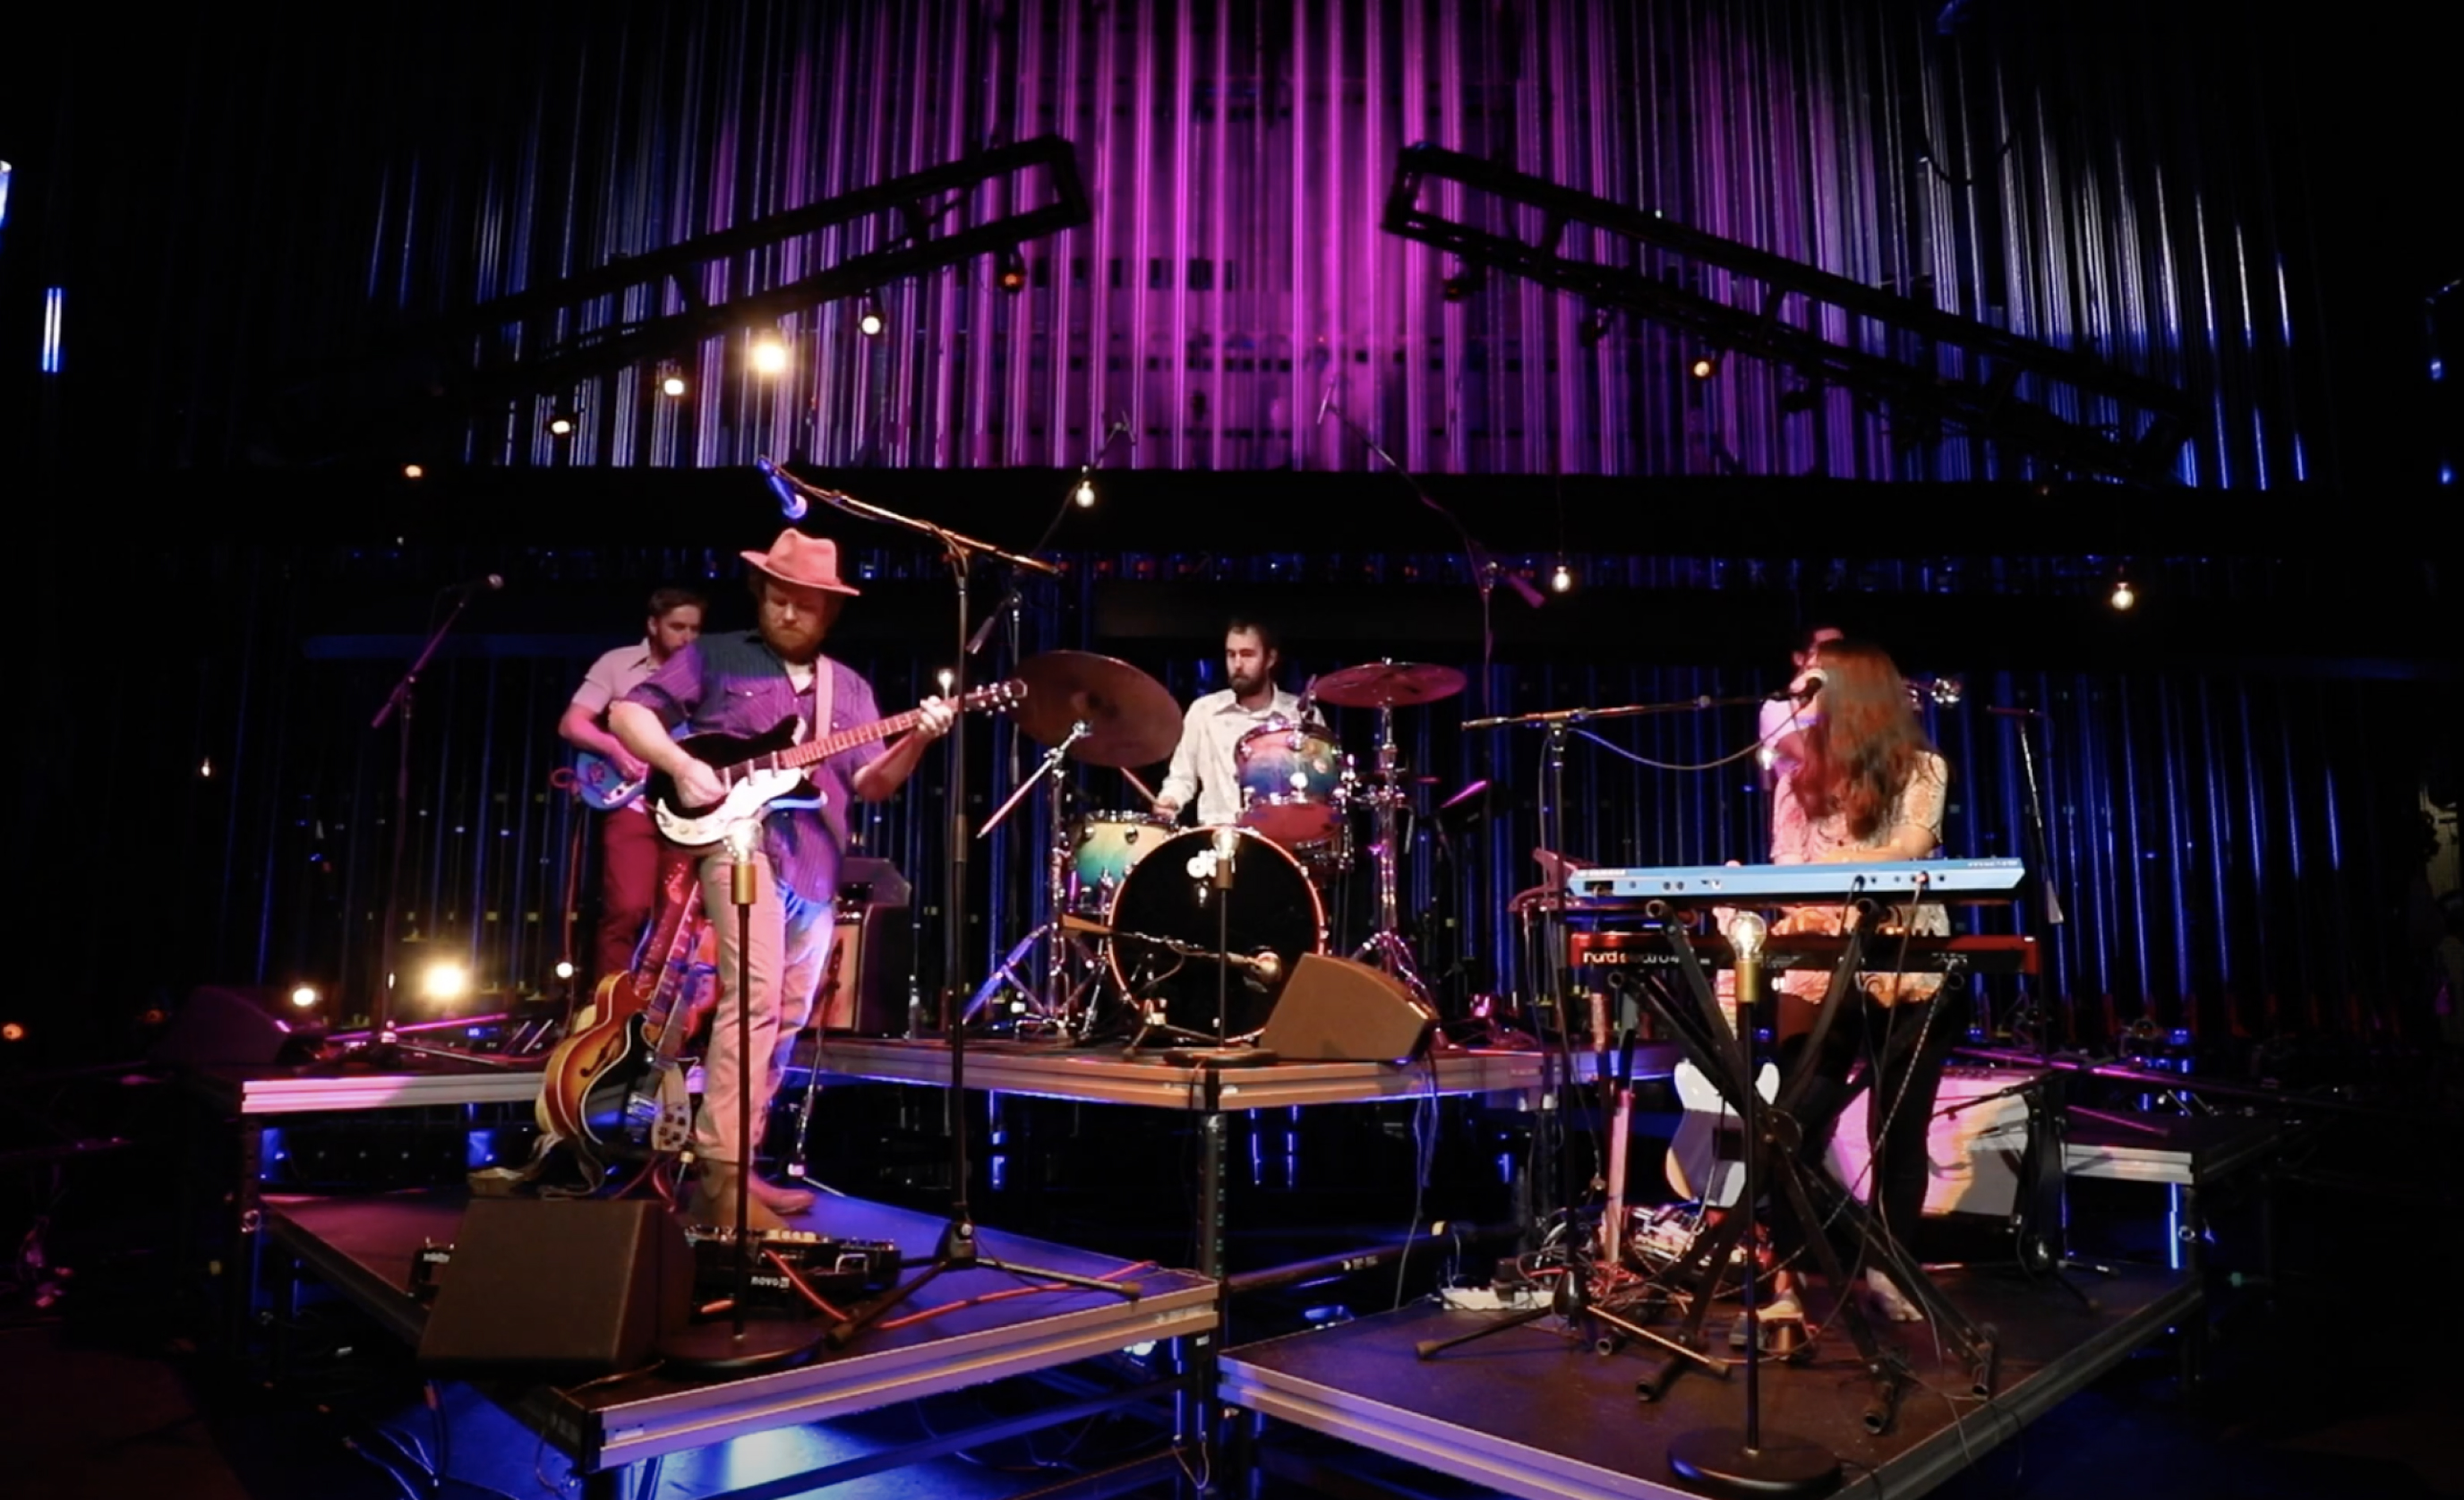 Band plays on a stage in colorful blue and purple lighting, four musicians playing various instruments on risers surrounding a drummer in the center.